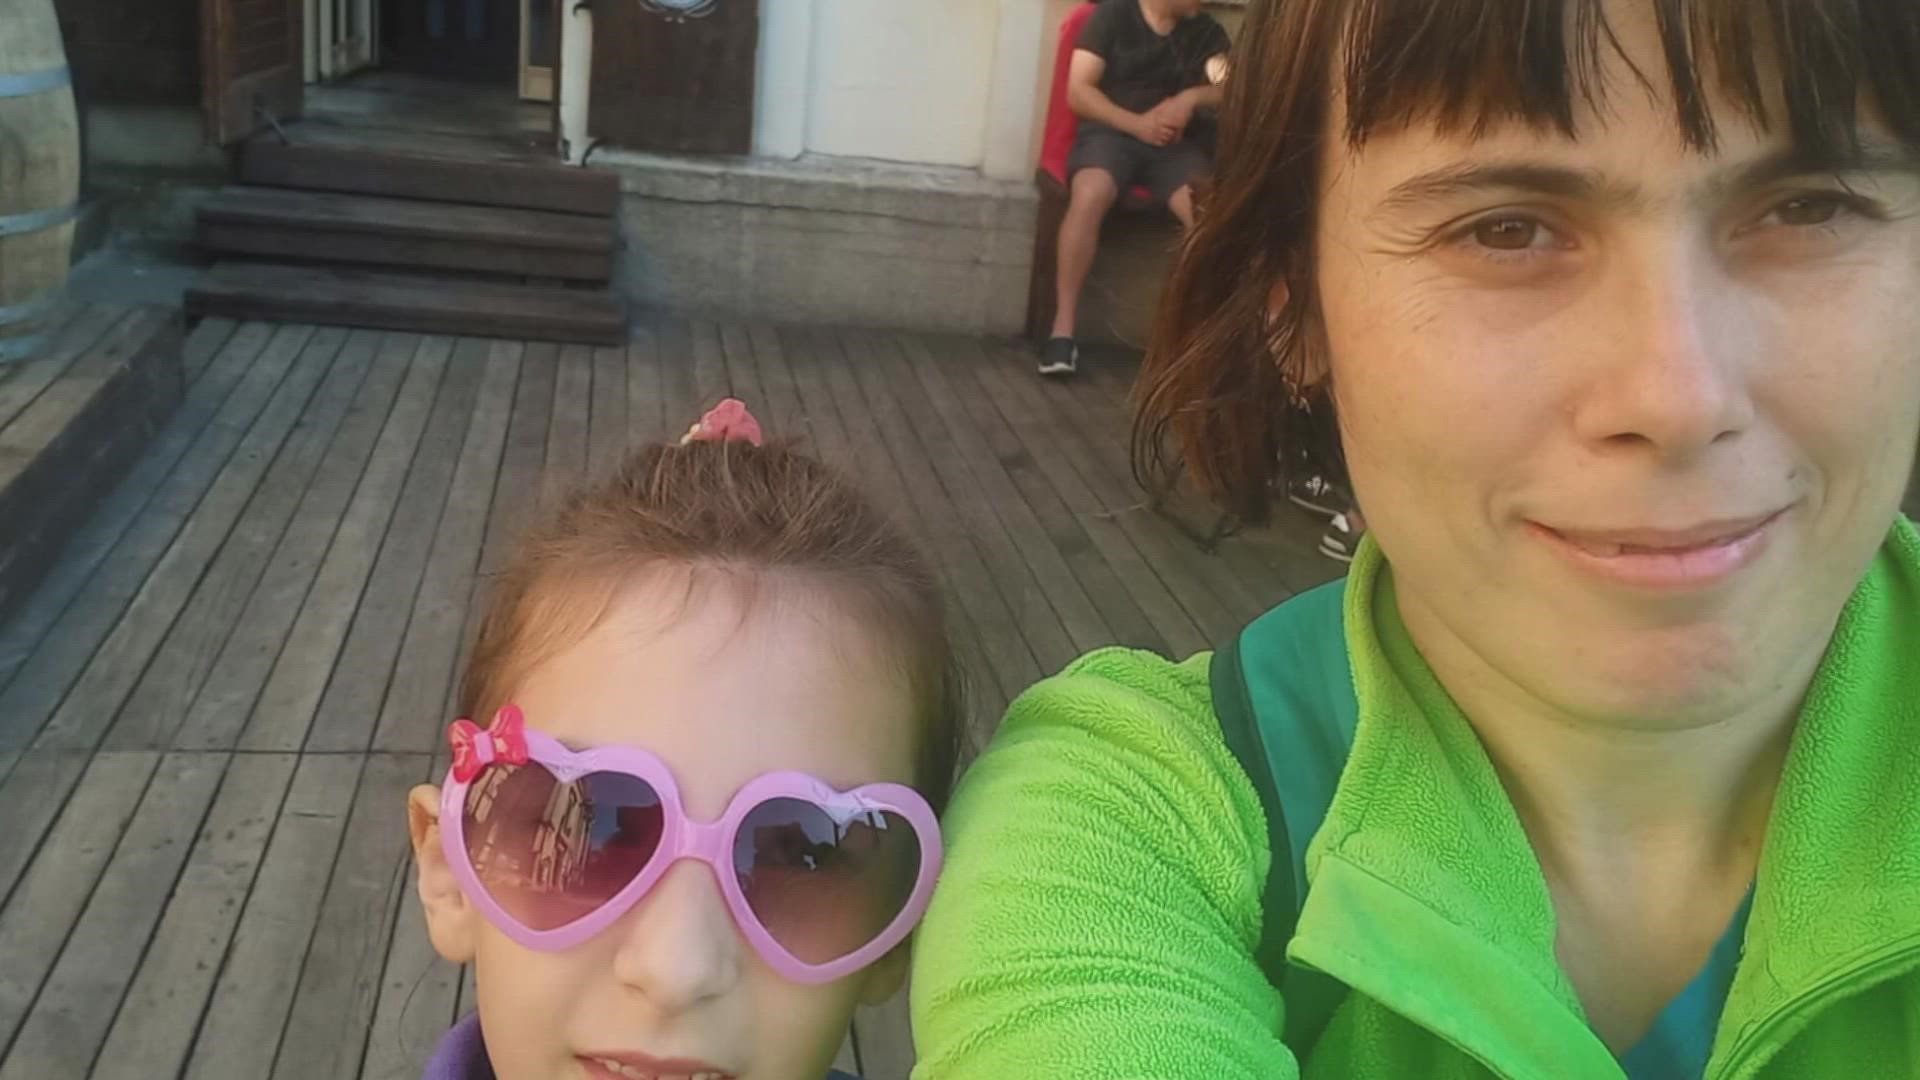 Maryna lives outside Kyiv, the capital city, along with her daughter Solomia – an 8-year-old who is already posing difficult questions.